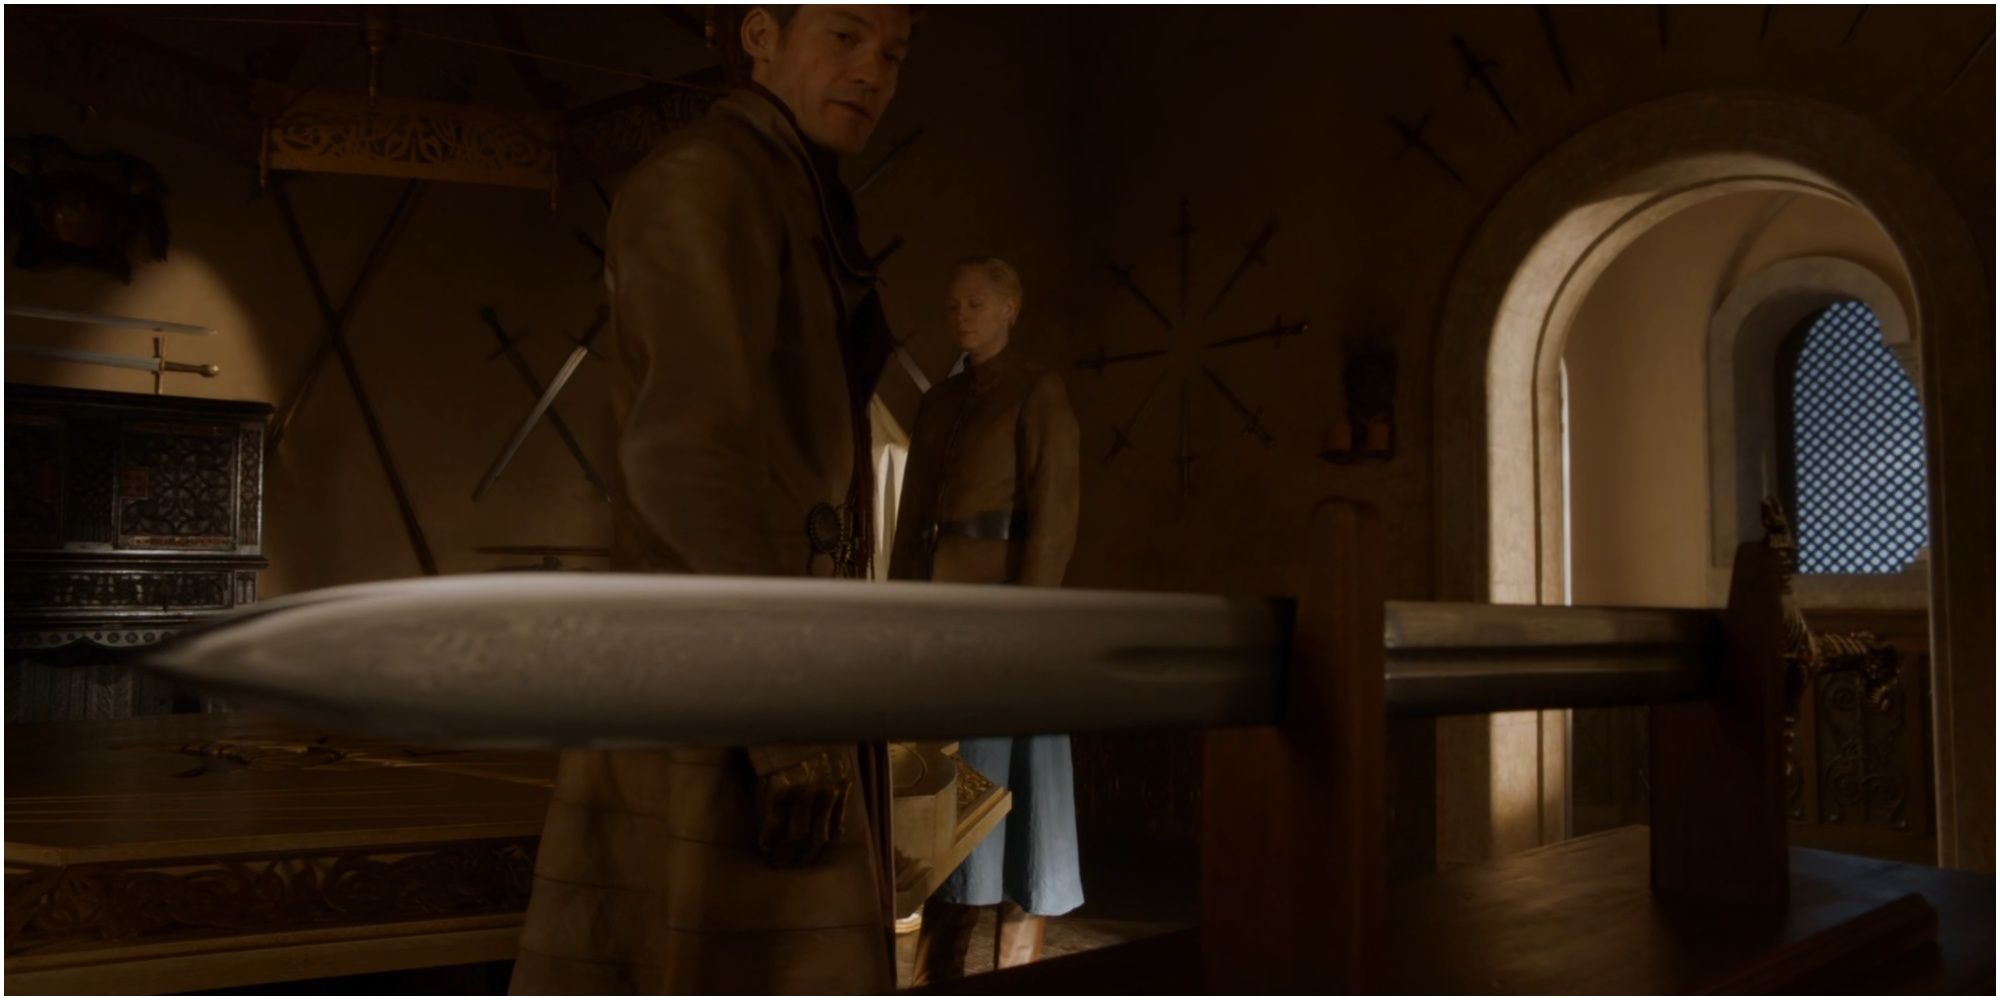 Jaime gives Brienne Oathkeeper (unnamed in the scene) in Game of Thrones.